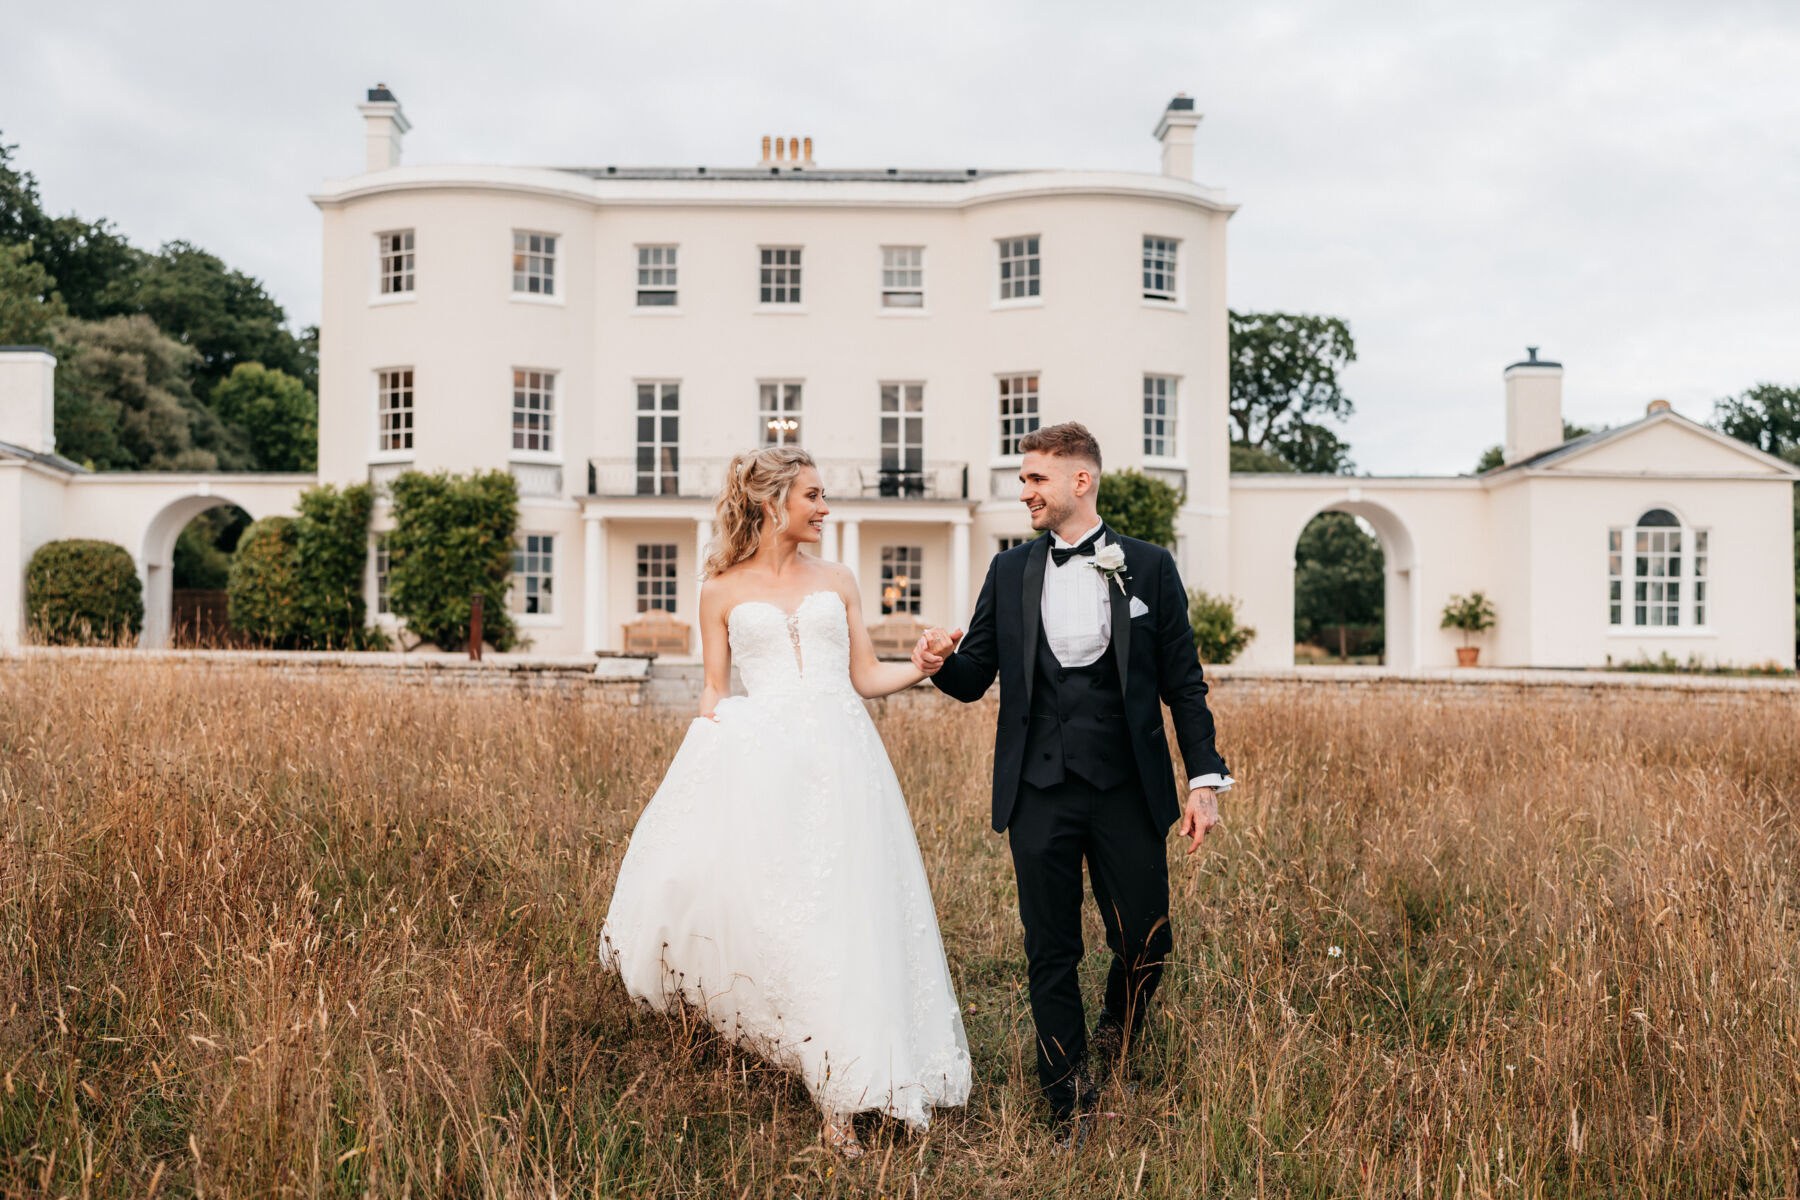 Storybox Films & Photography - Somerset & UK wedding videography and photography